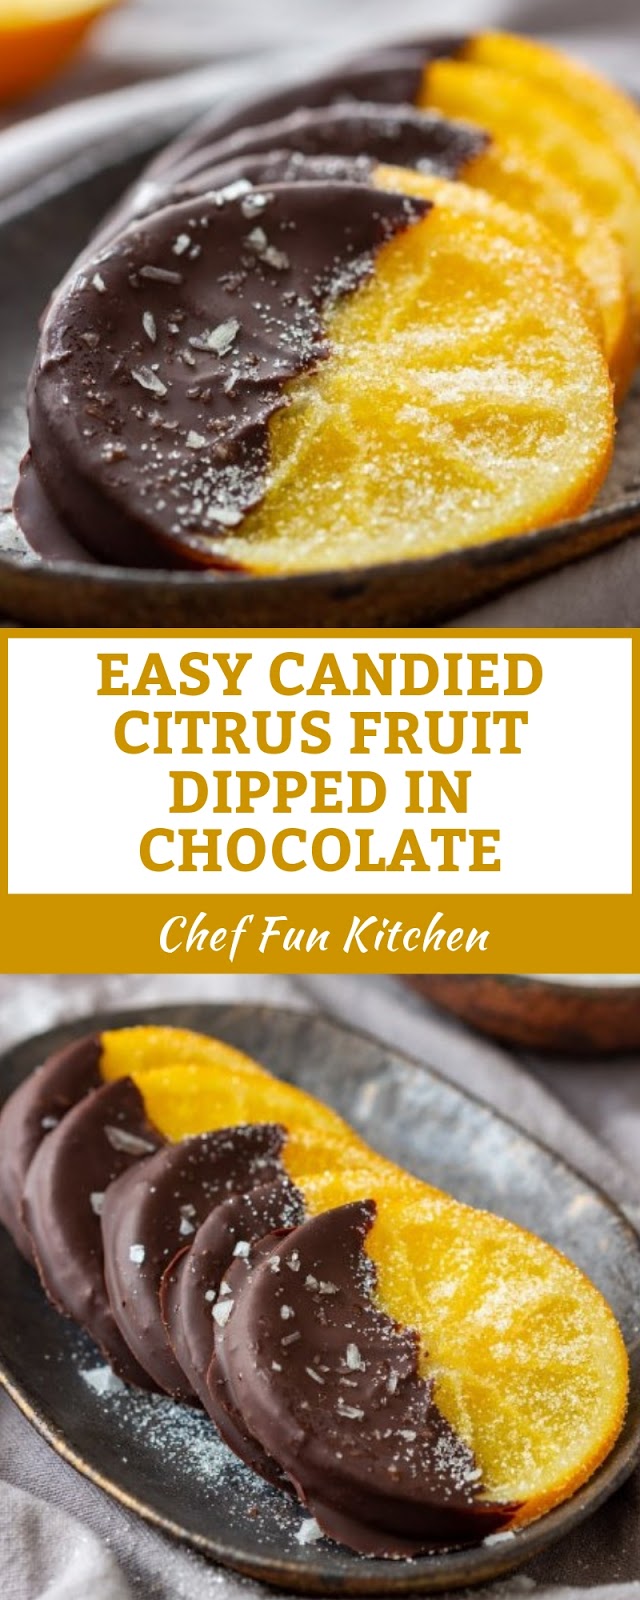 EASY CANDIED CITRUS FRUIT DIPPED IN CHOCOLATE